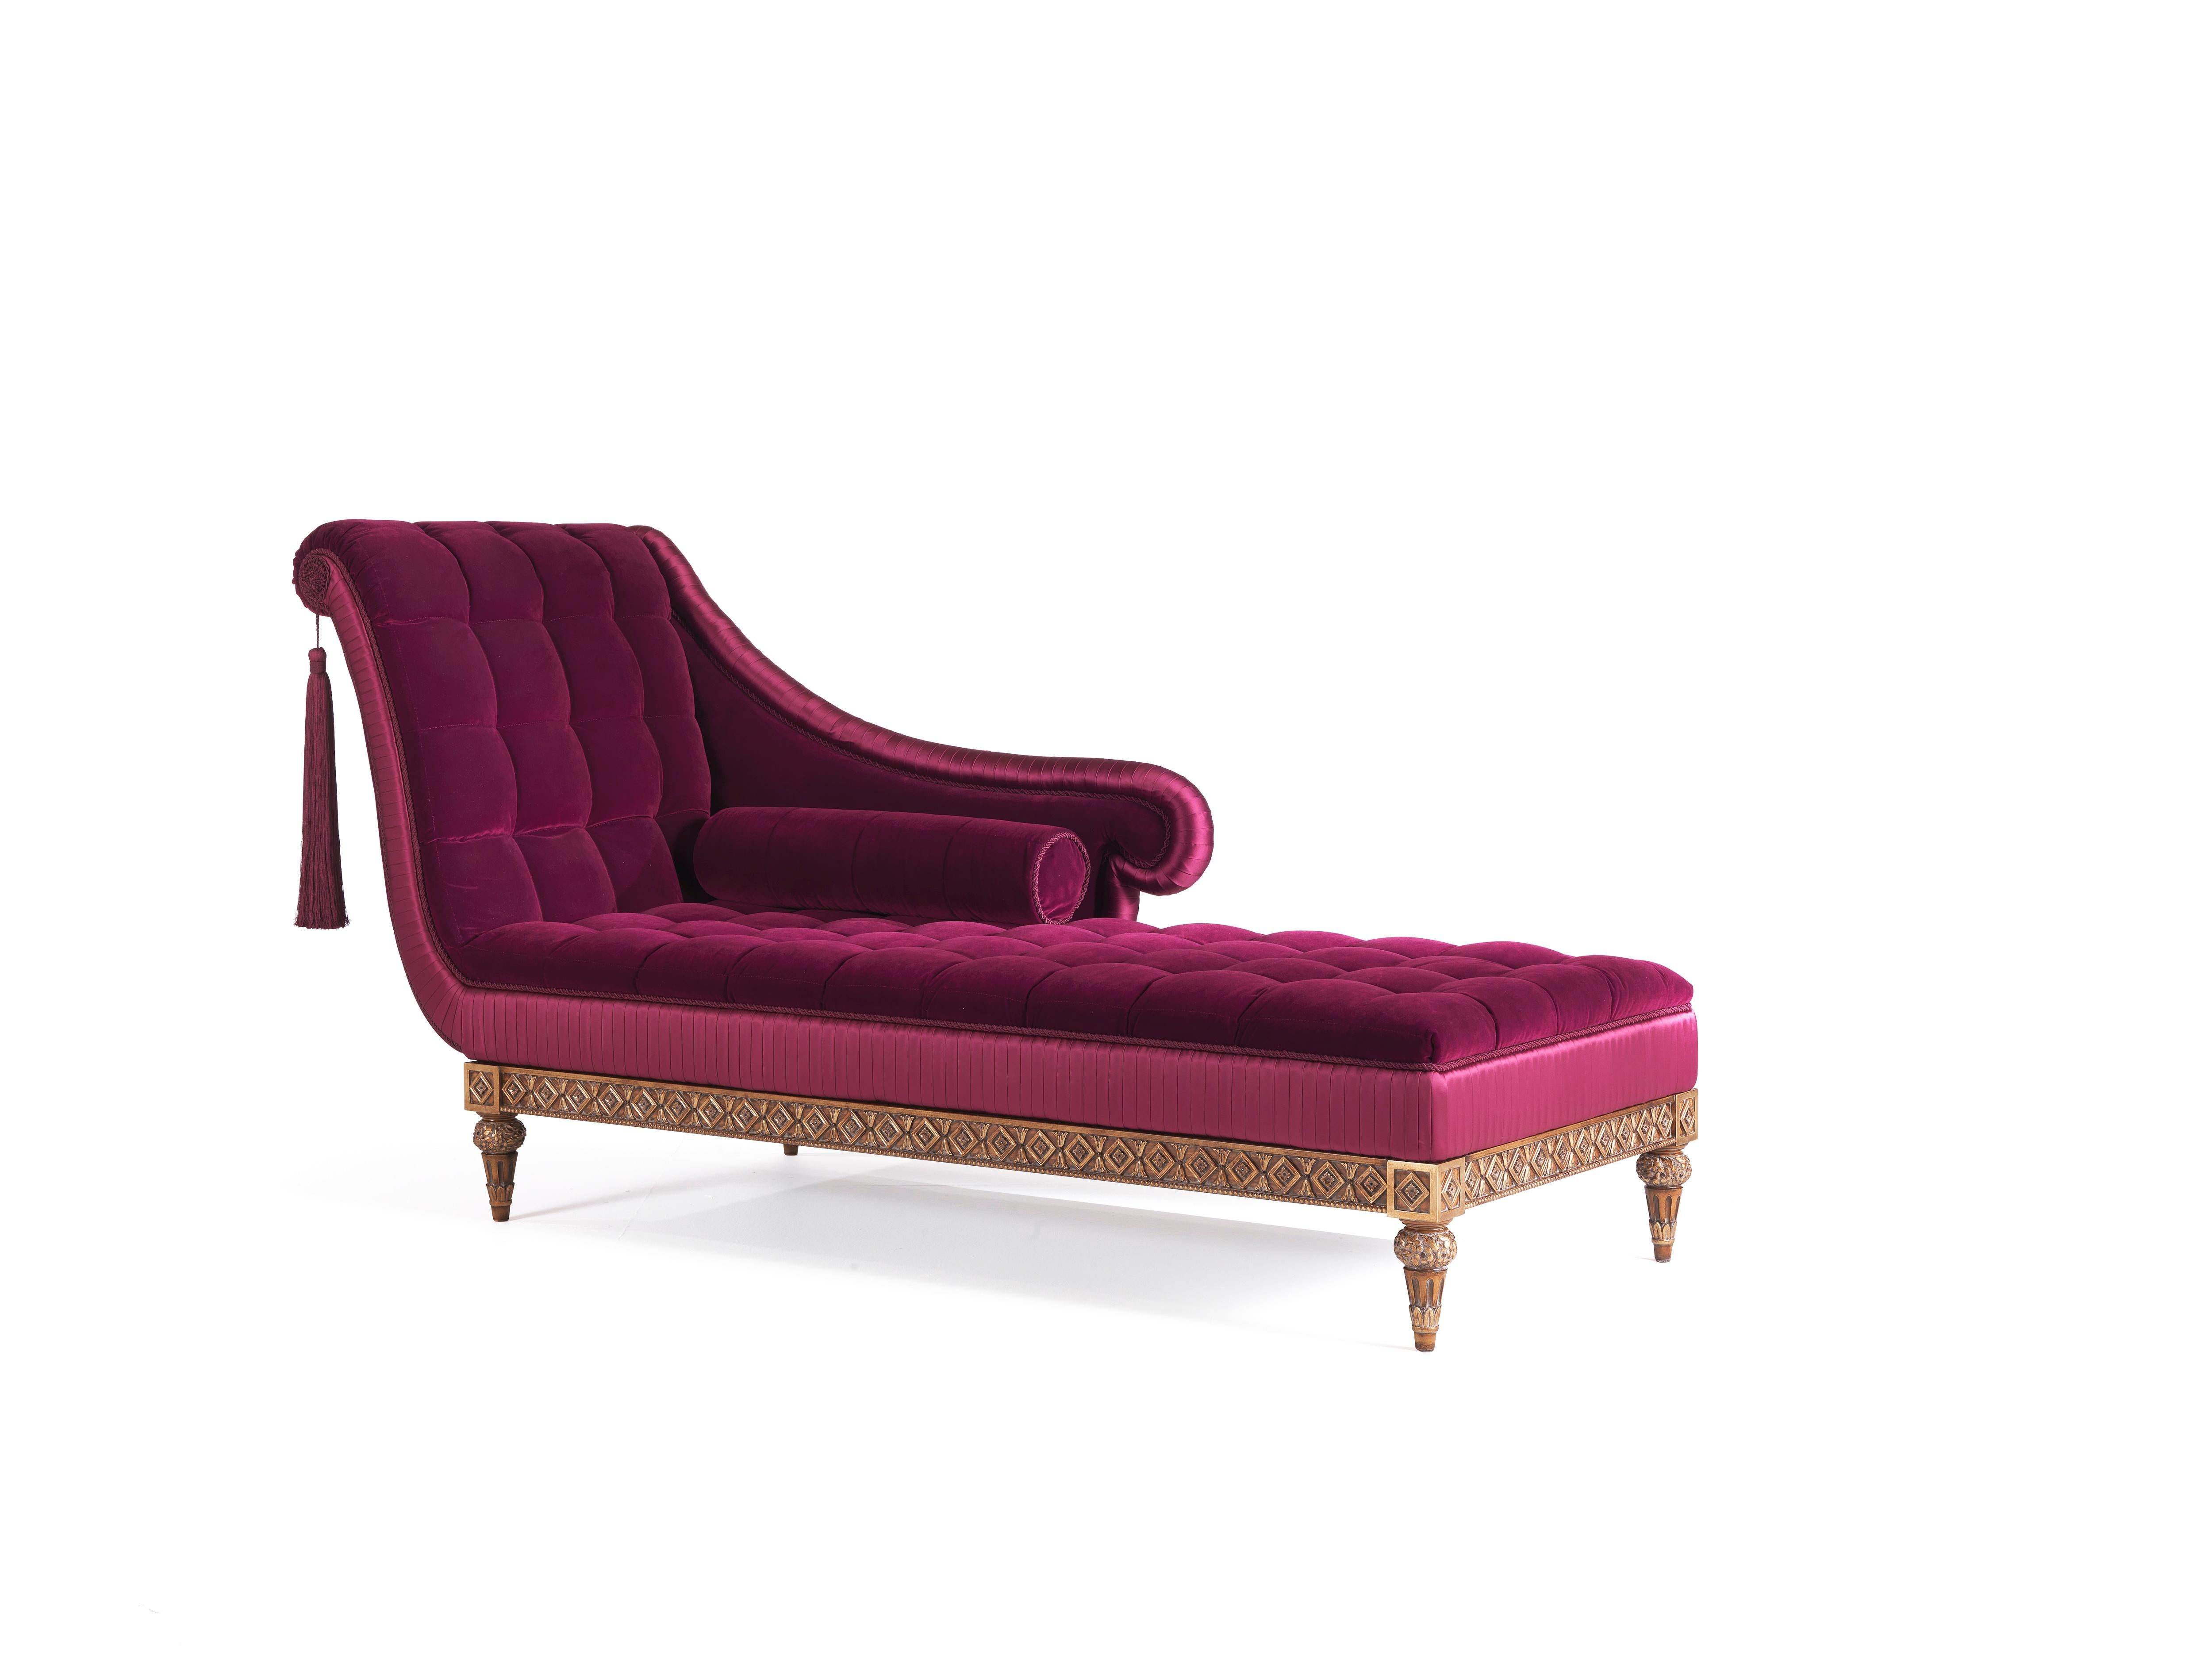 The elegant Jacqueline dormeuse was designed for the most exclusive interiors: it will perfectly fit classic rooms, as well as contemporary and modern as a gorgeous accent piece. The solid wood frame is hand carved at the base, and finished in